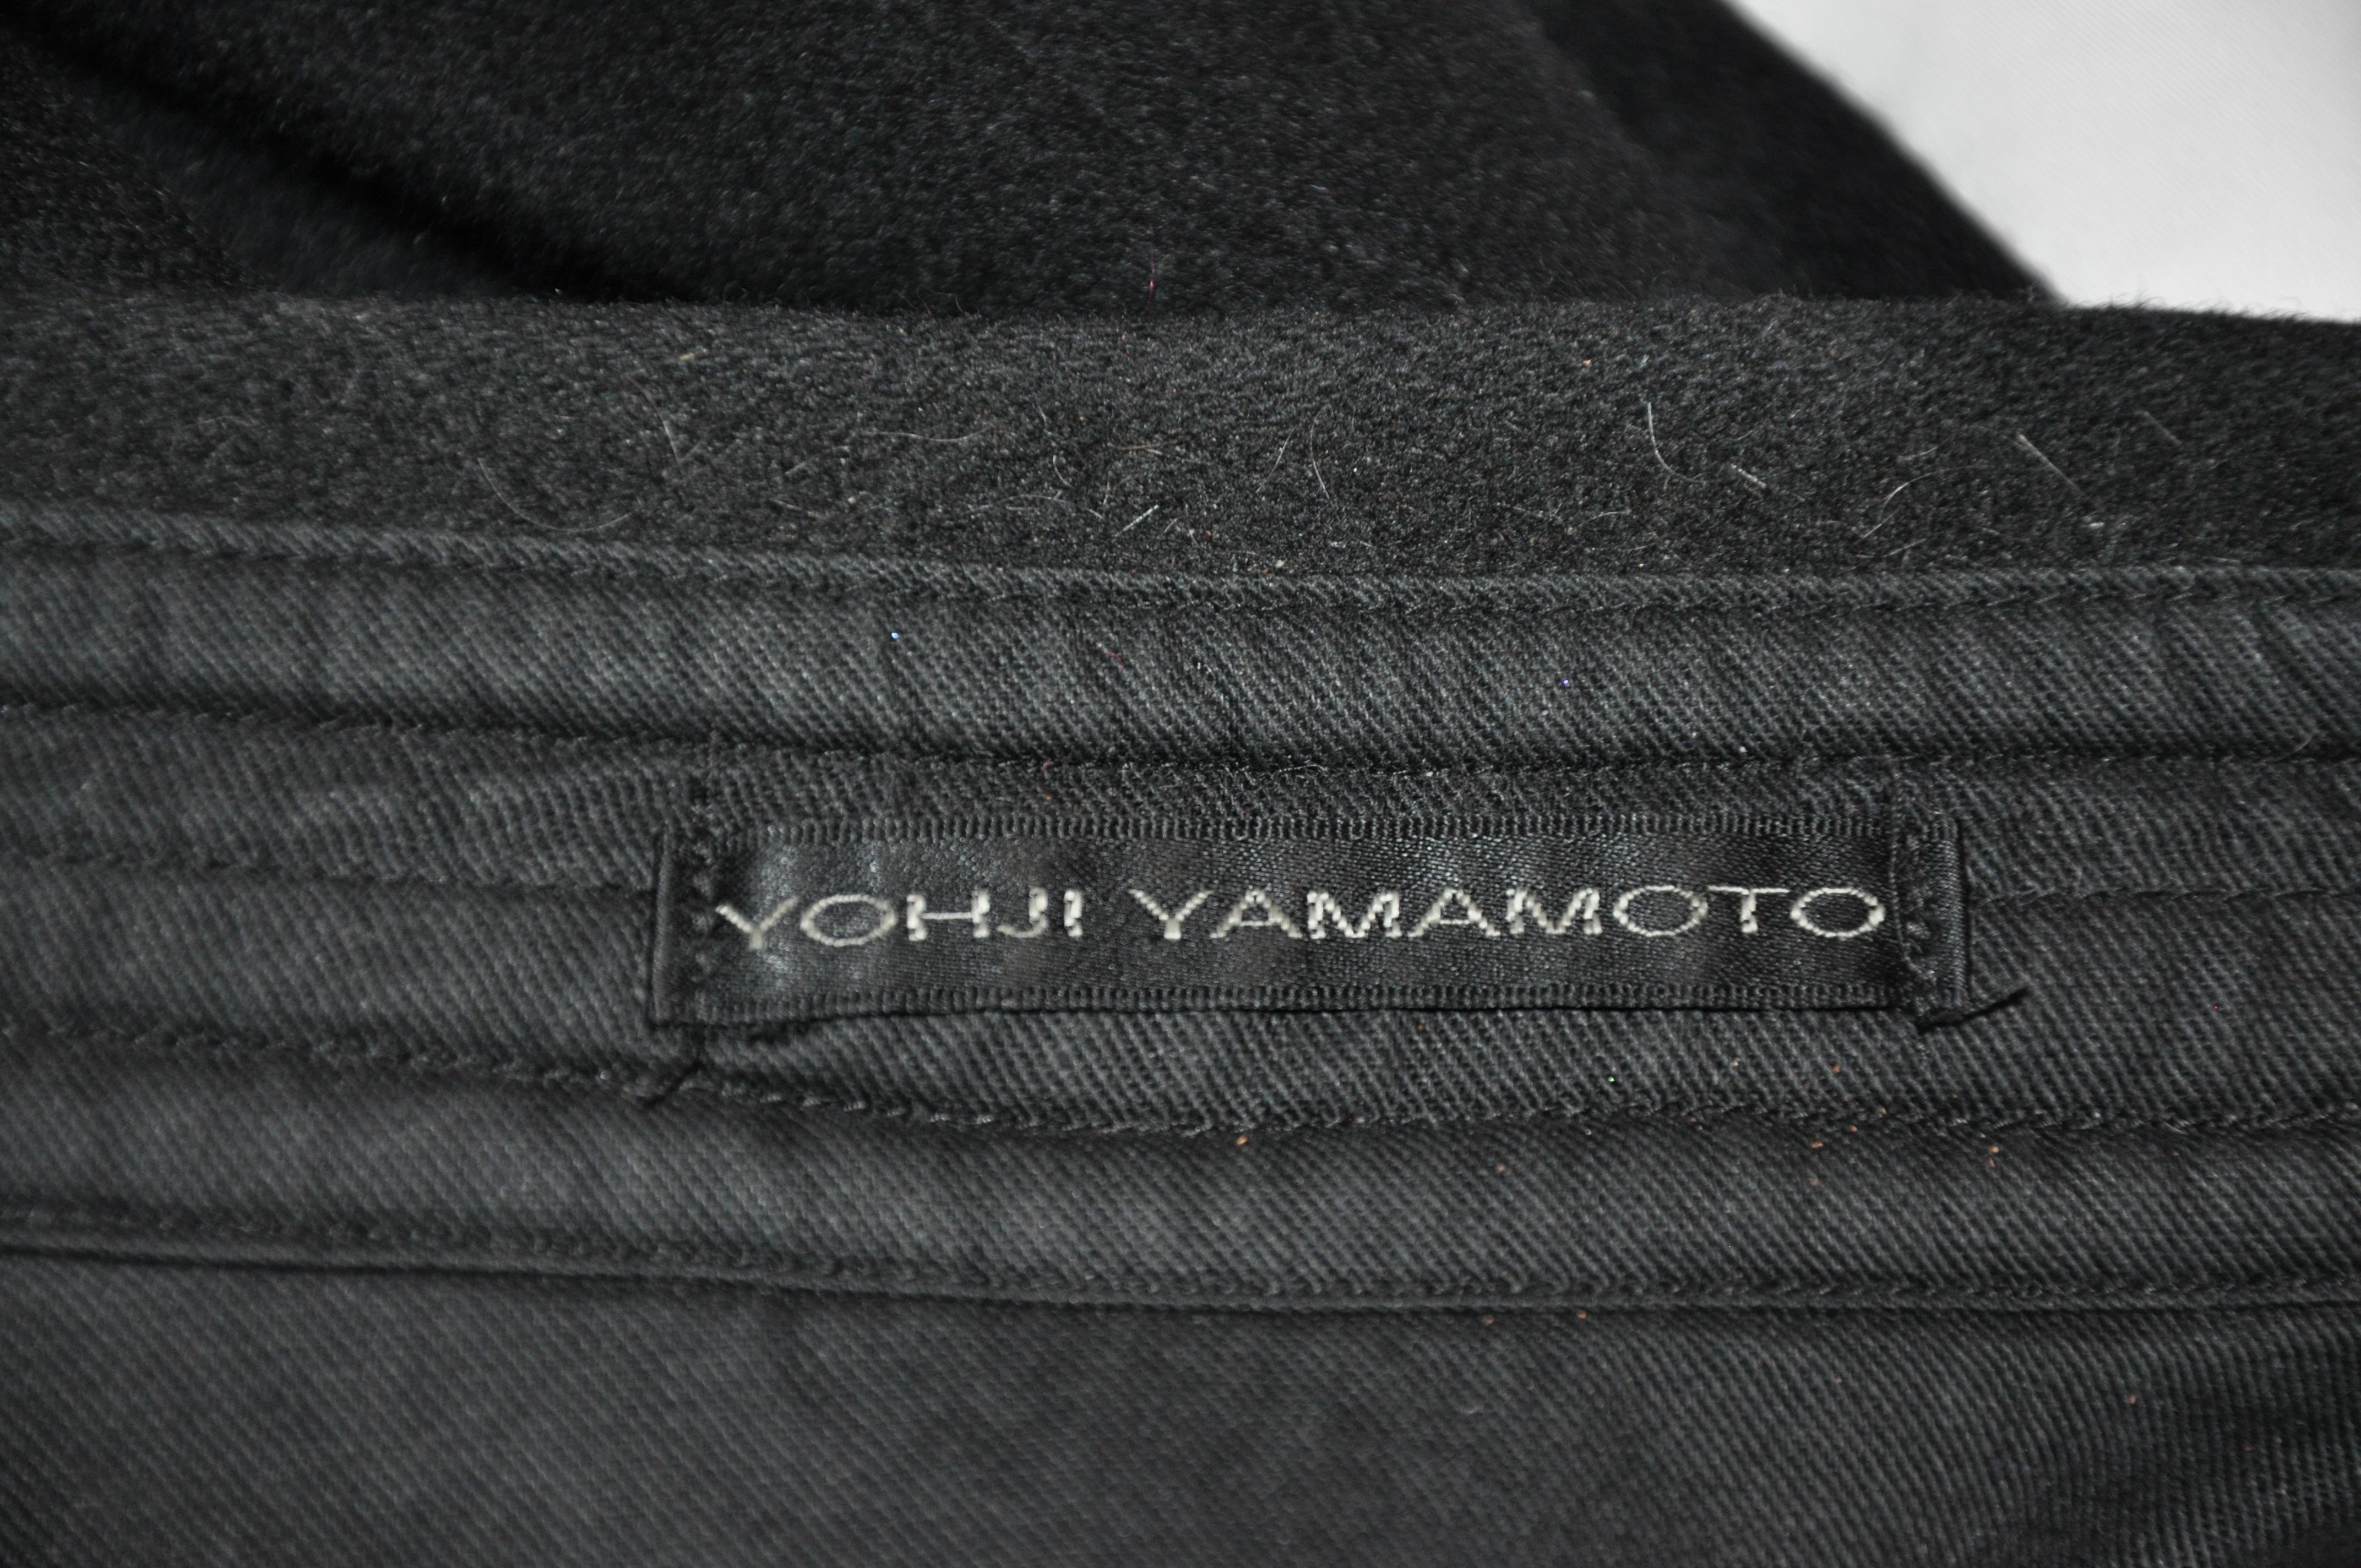    Yohji Yamamoto wonderful men's black 2-way zipper front is  accented with two patch breast buttoned patch pockets as well as the deconstructed scallop hemline. The armpits are detailed with eyelet for added comfort. Finished French seams are